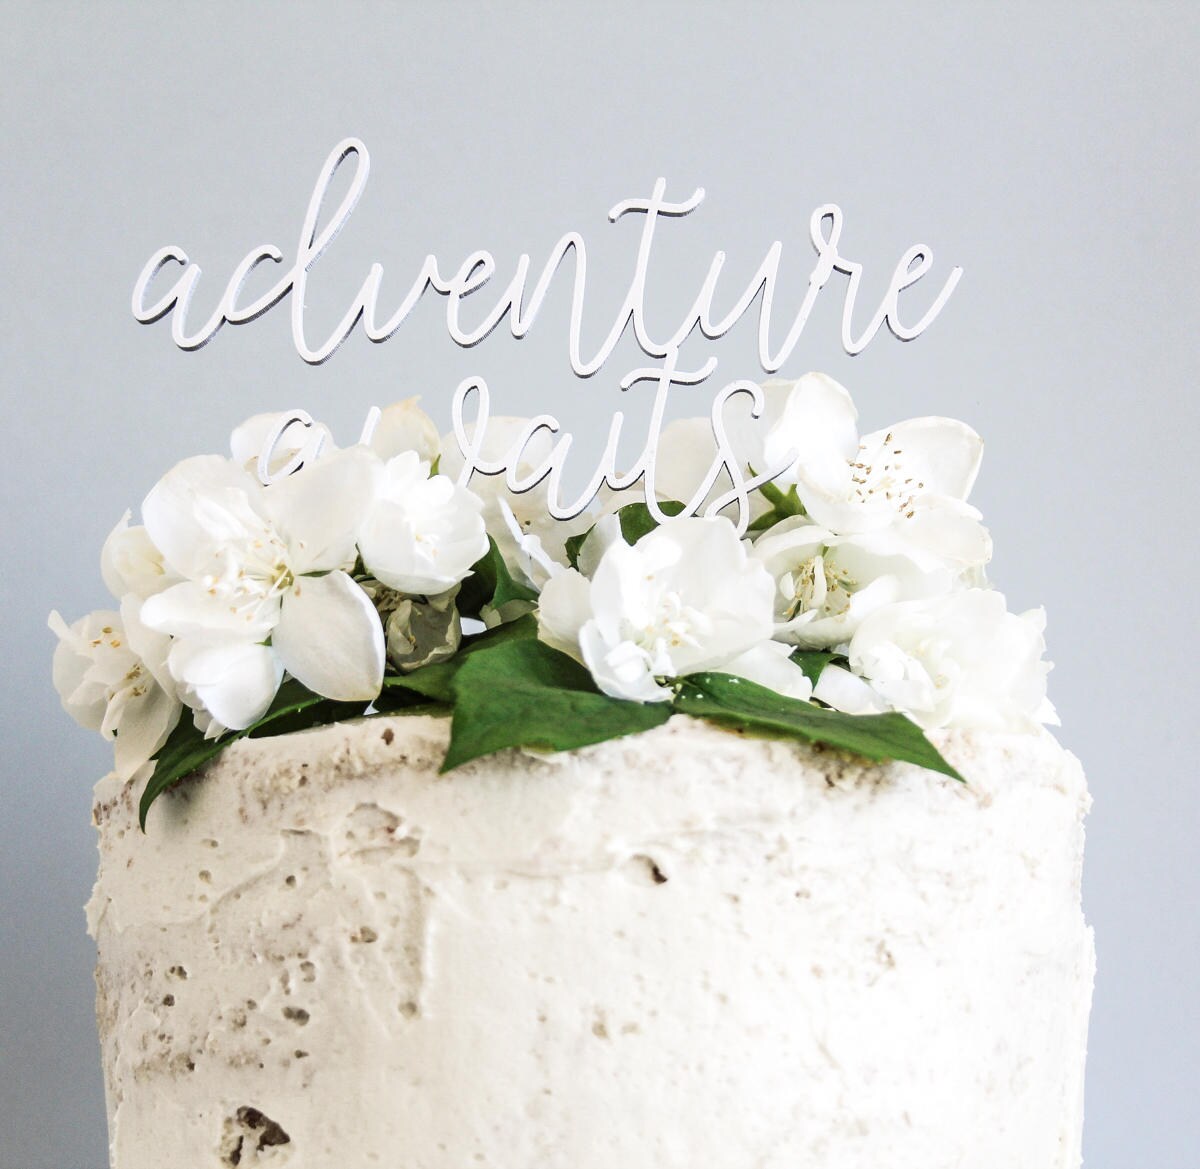 Adventure Awaits Baby Shower Cake Topper in White - Baby Shower, Cake Toppers uk